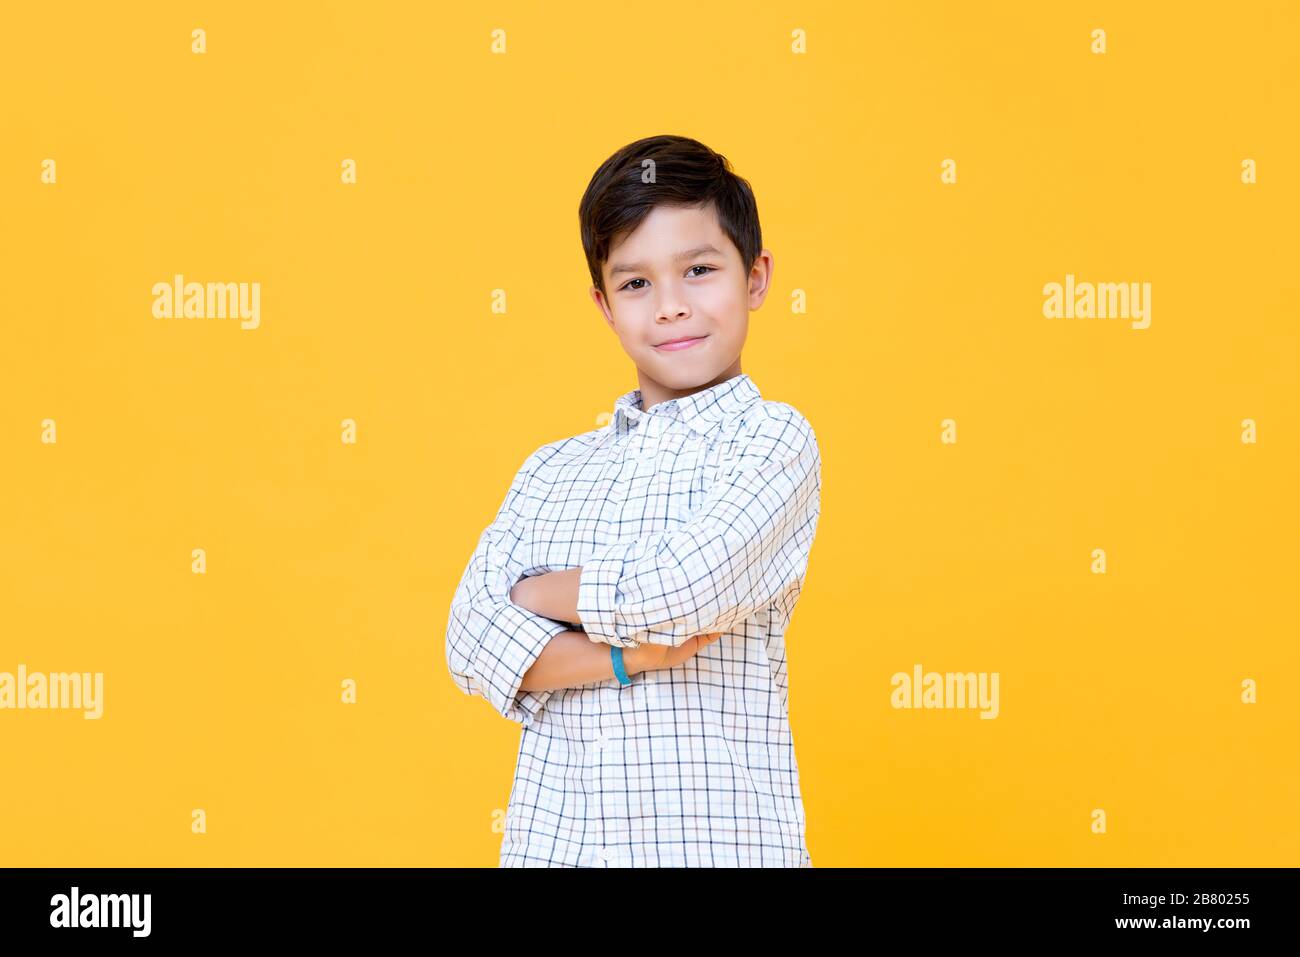 Happy smiling boy with arm crossed gesture isolated on yellow background Stock Photo